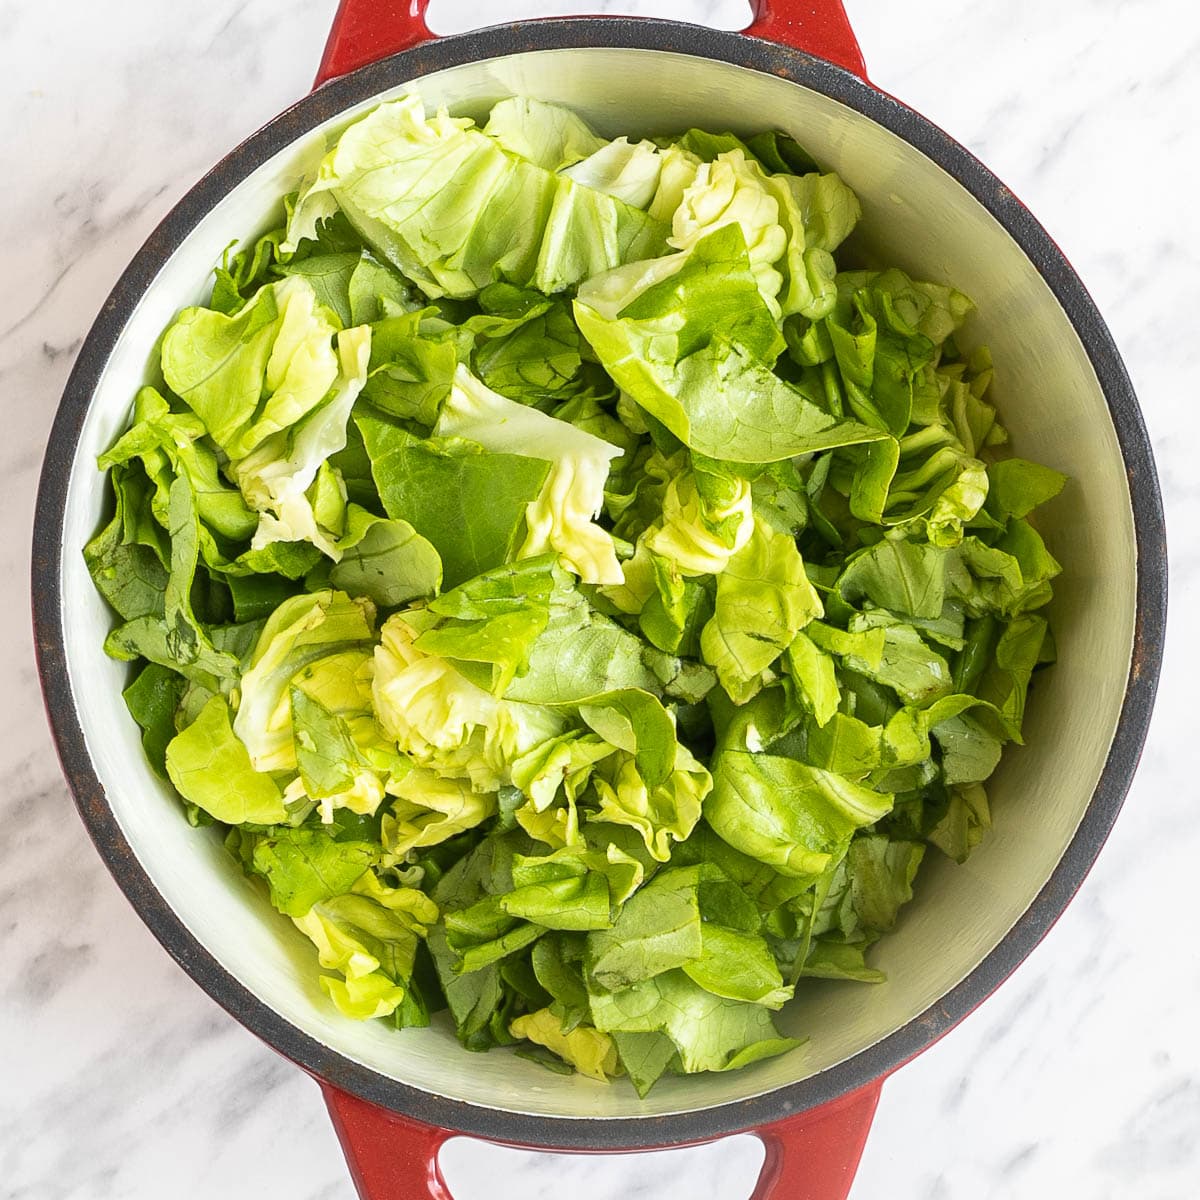 A red white enameled Dutch oven with chopped fresh green escarole.